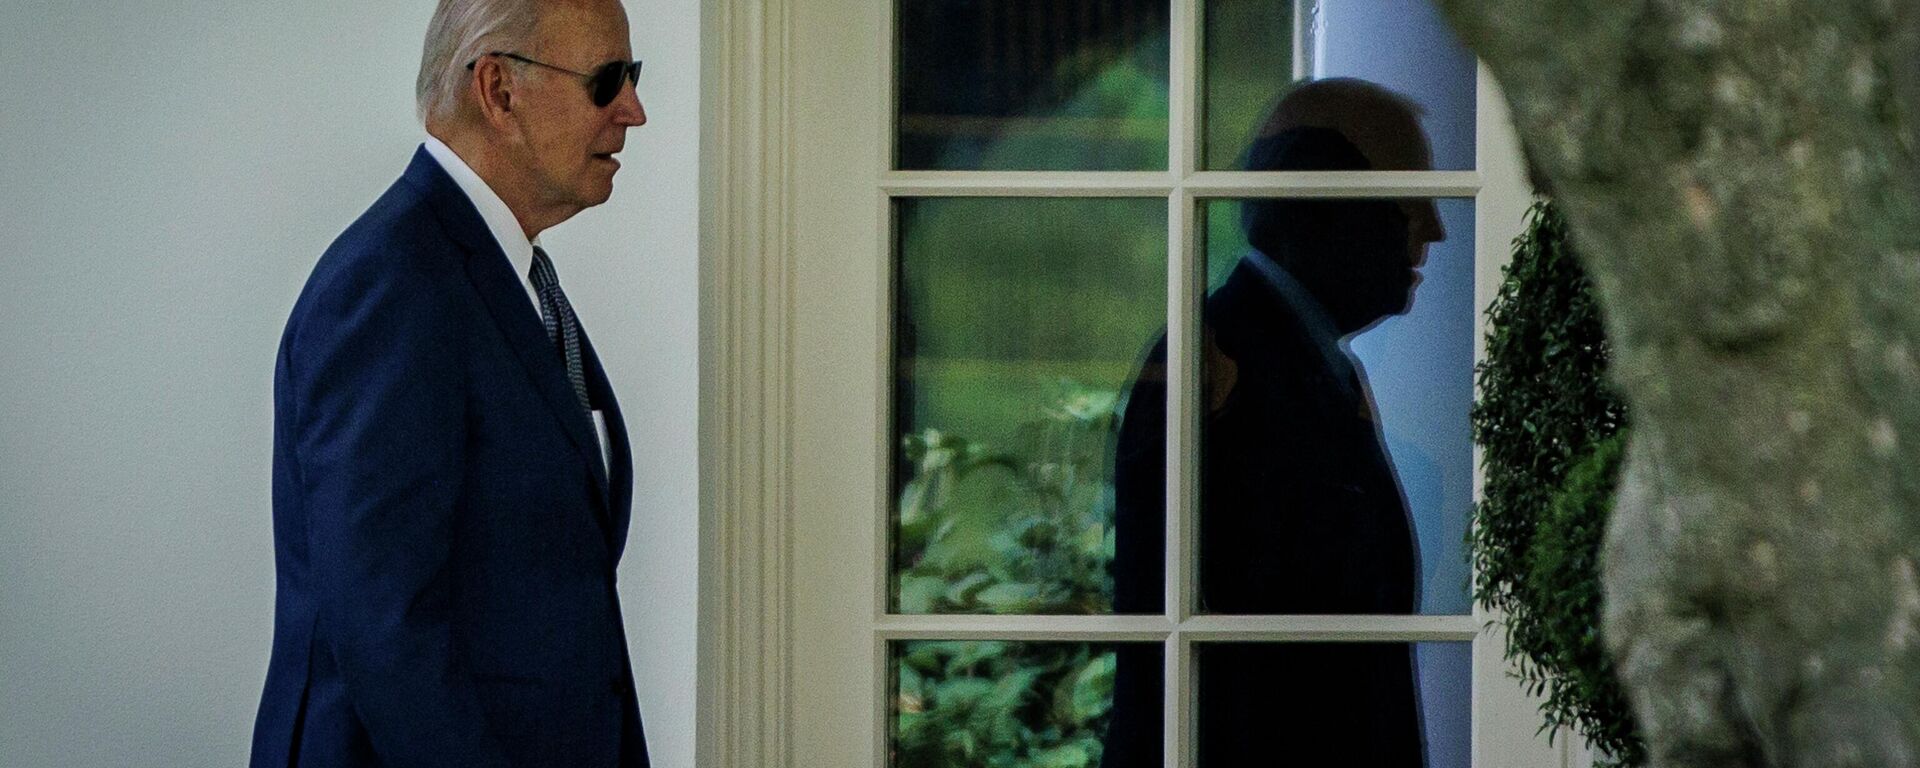 US President Joe Biden walks to the Oval Office in Washington DC, after visiting the Central Intelligence Agency (CIA) headquarters in Langley, where he congratulated the Agency and staff on the 75th anniversary of its founding on July 8, 2022 - Sputnik International, 1920, 09.07.2022